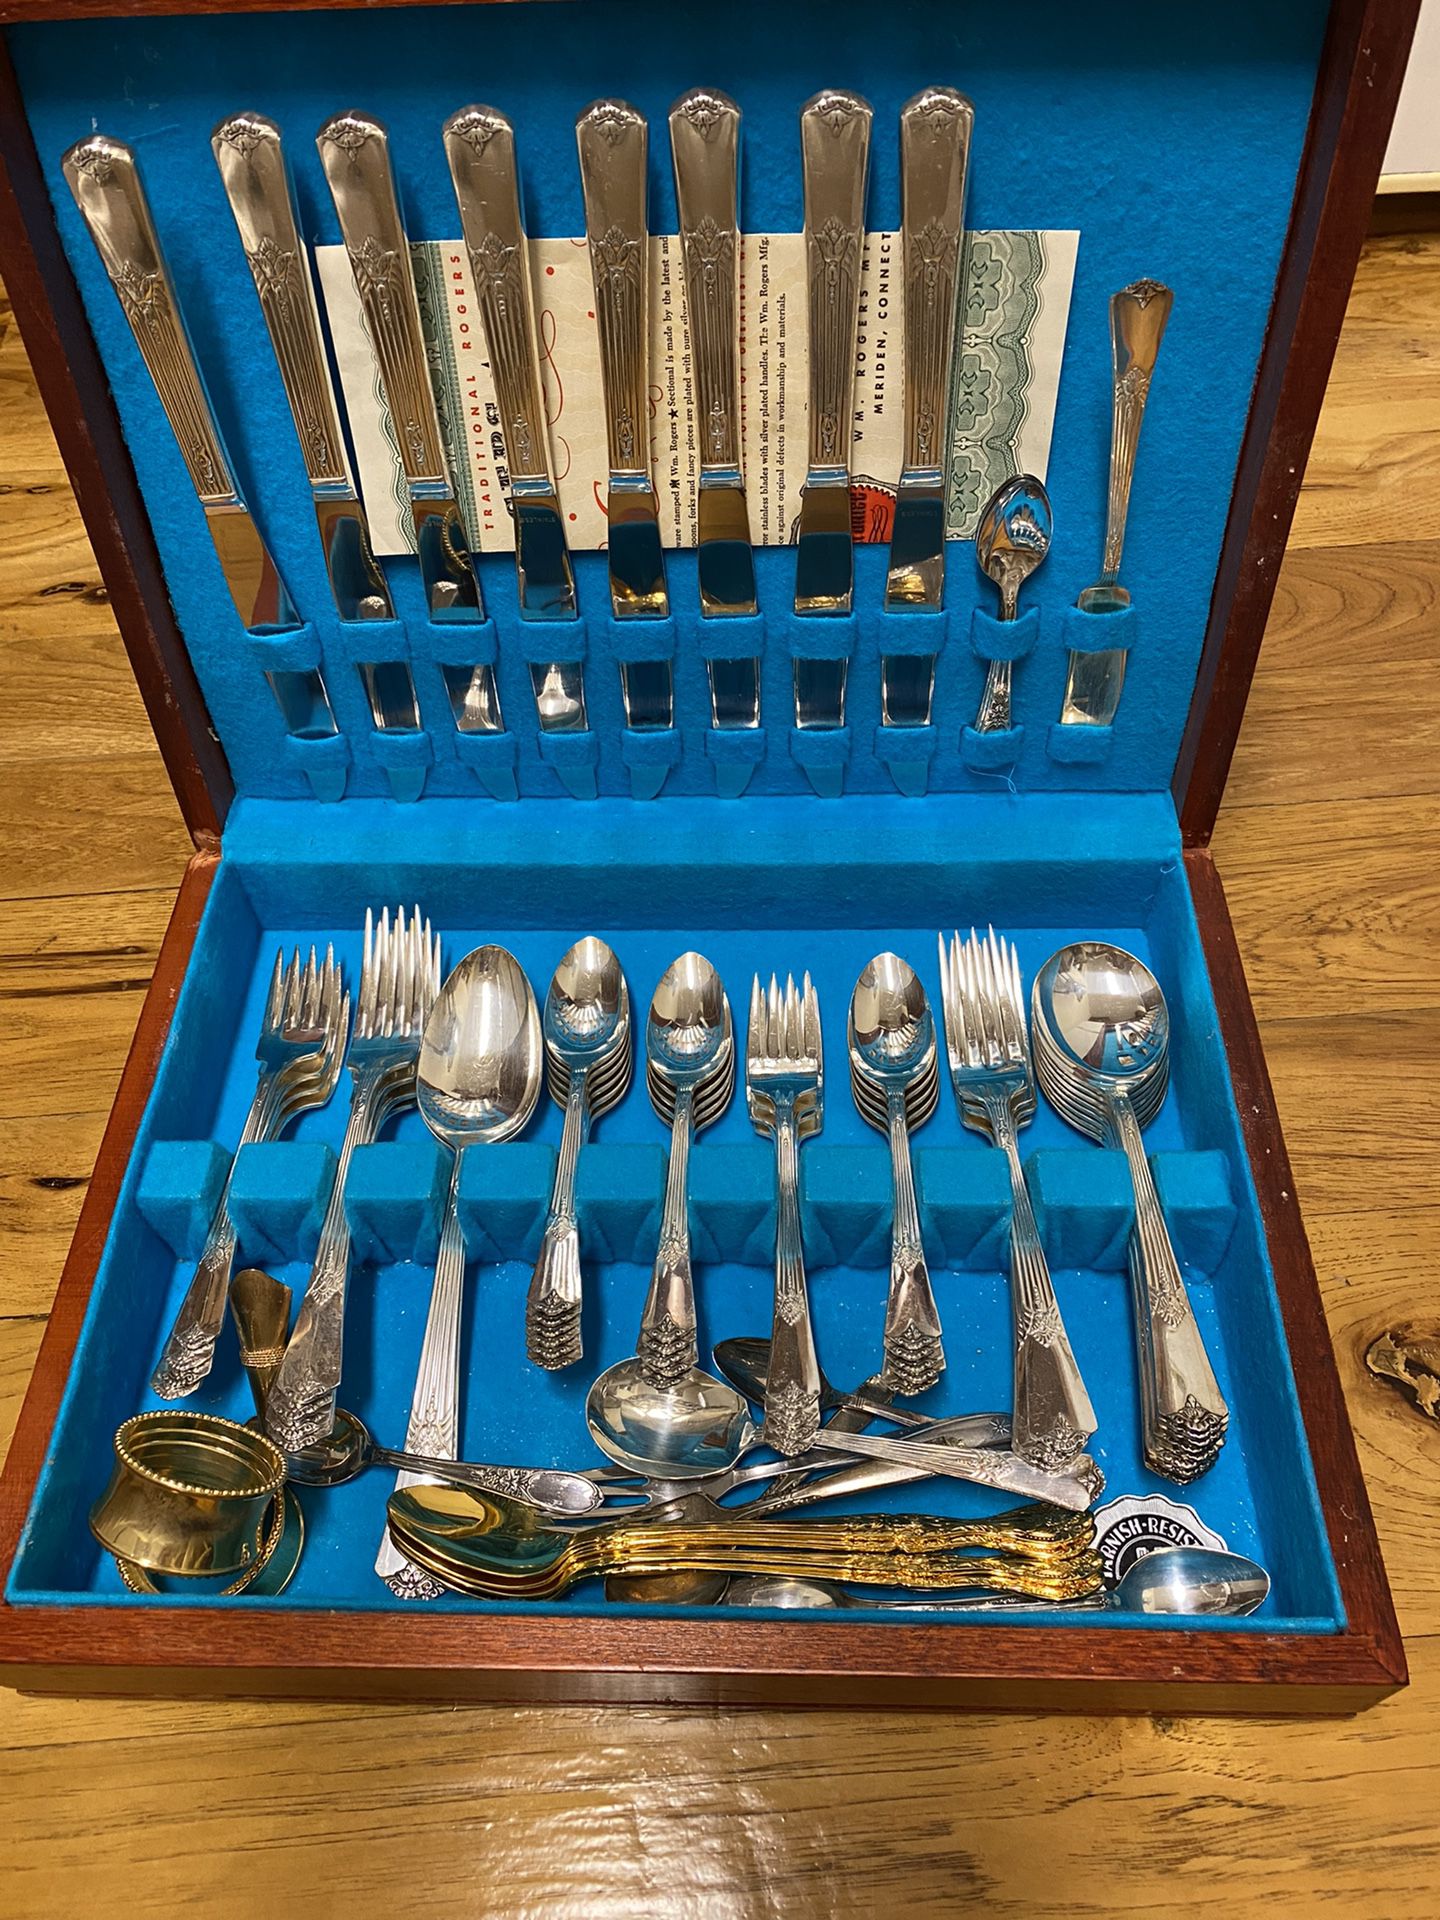 Wm Rogers Sectional 1825 Silverware In Box Mint Condition 